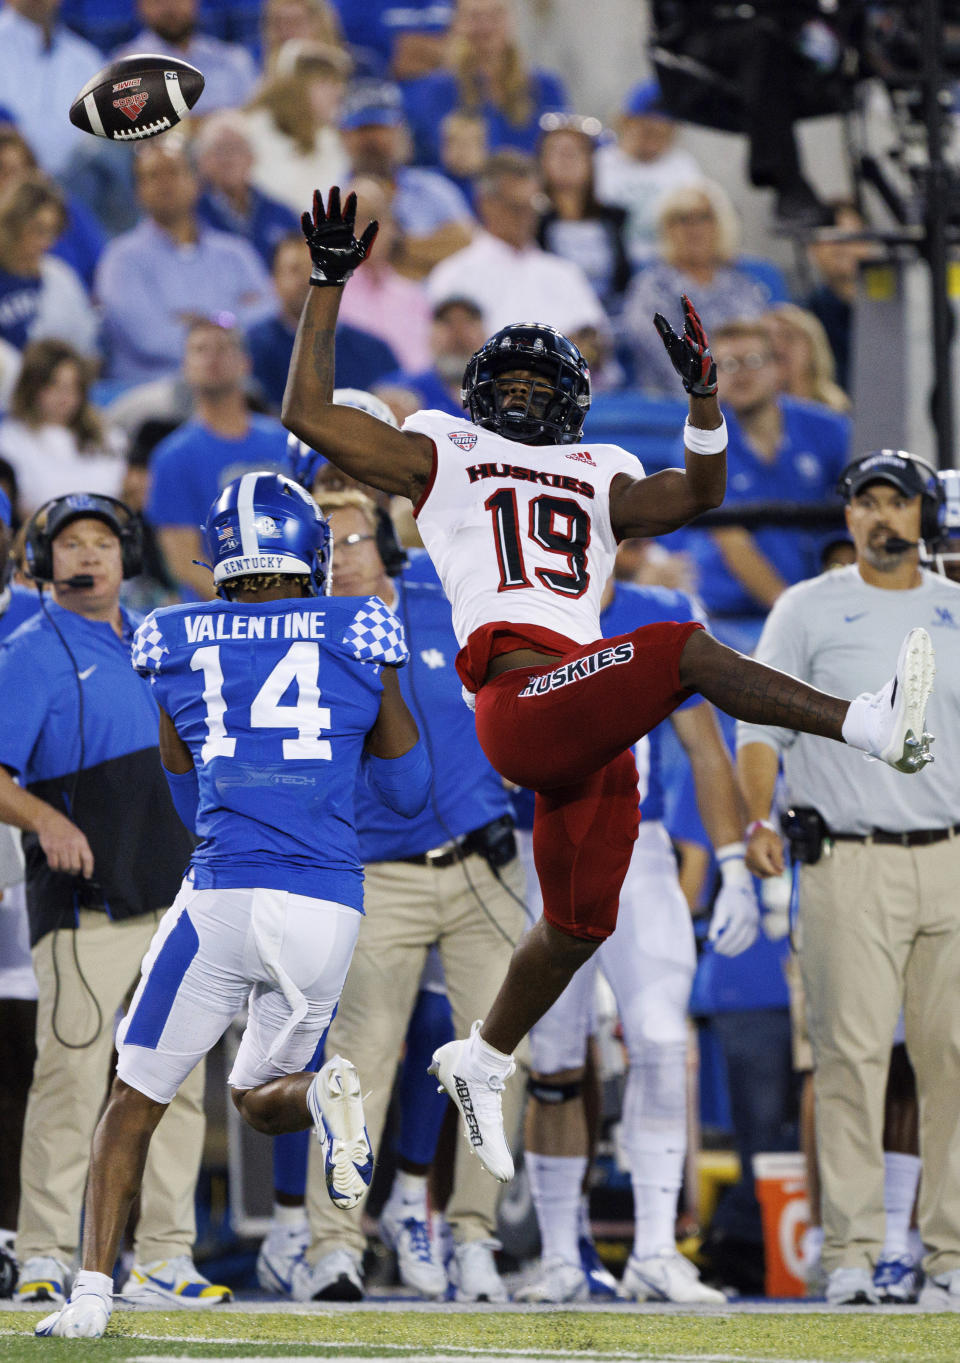 Northern Illinois wide receiver Shemar Thornton (19) reaches out and misses a pass while being guarded by Kentucky defensive back Carrington Valentine (14) during the first half of an NCAA college football game in Lexington, Ky., Saturday, Sept. 24, 2022. (AP Photo/Michael Clubb)